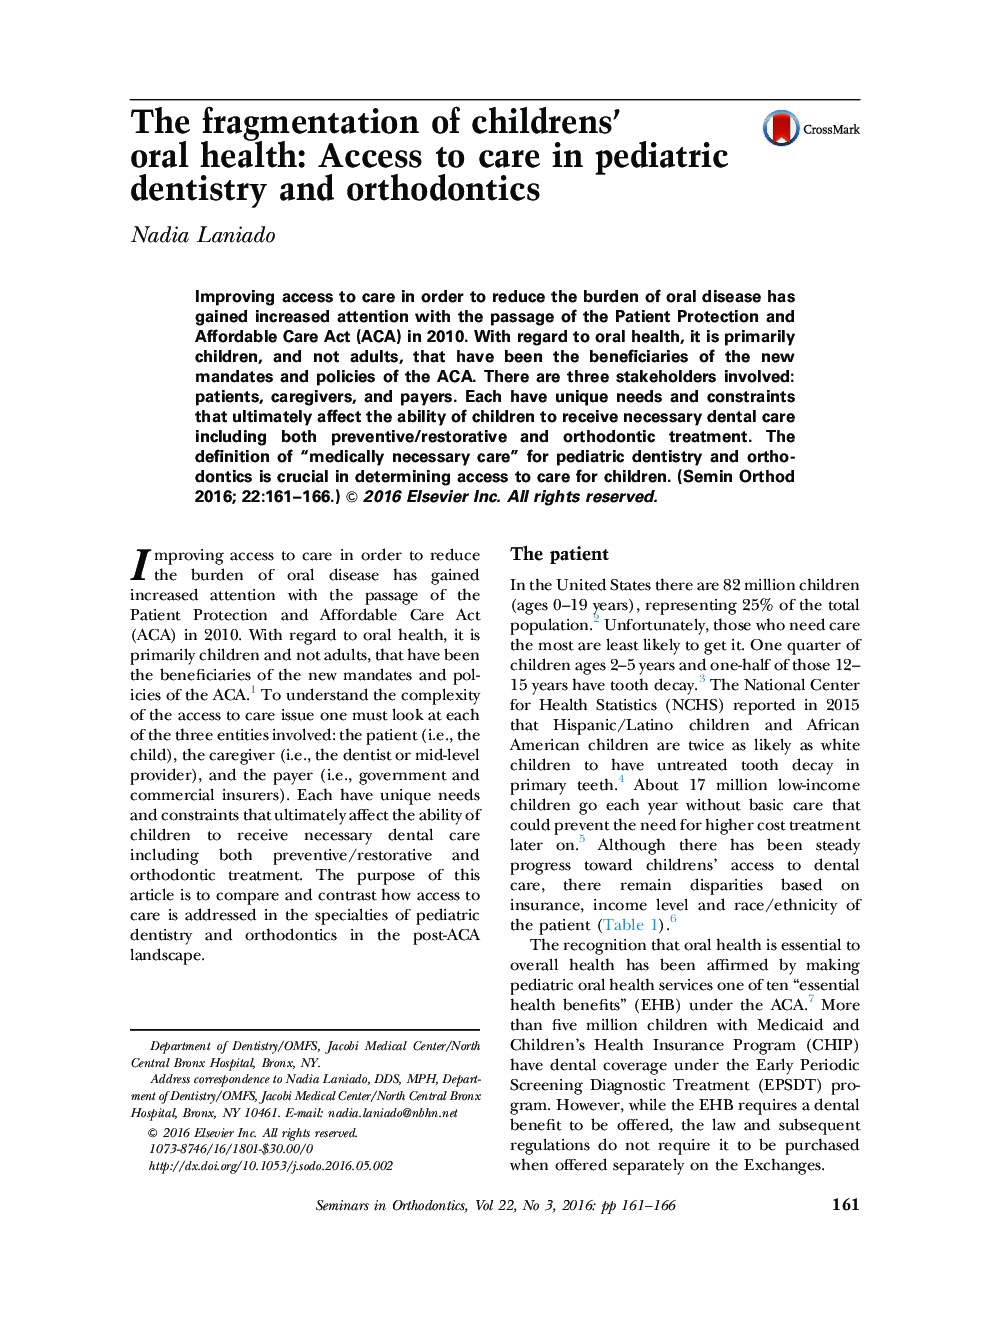 The fragmentation of childrens’ oral health: Access to care in pediatric dentistry and orthodontics